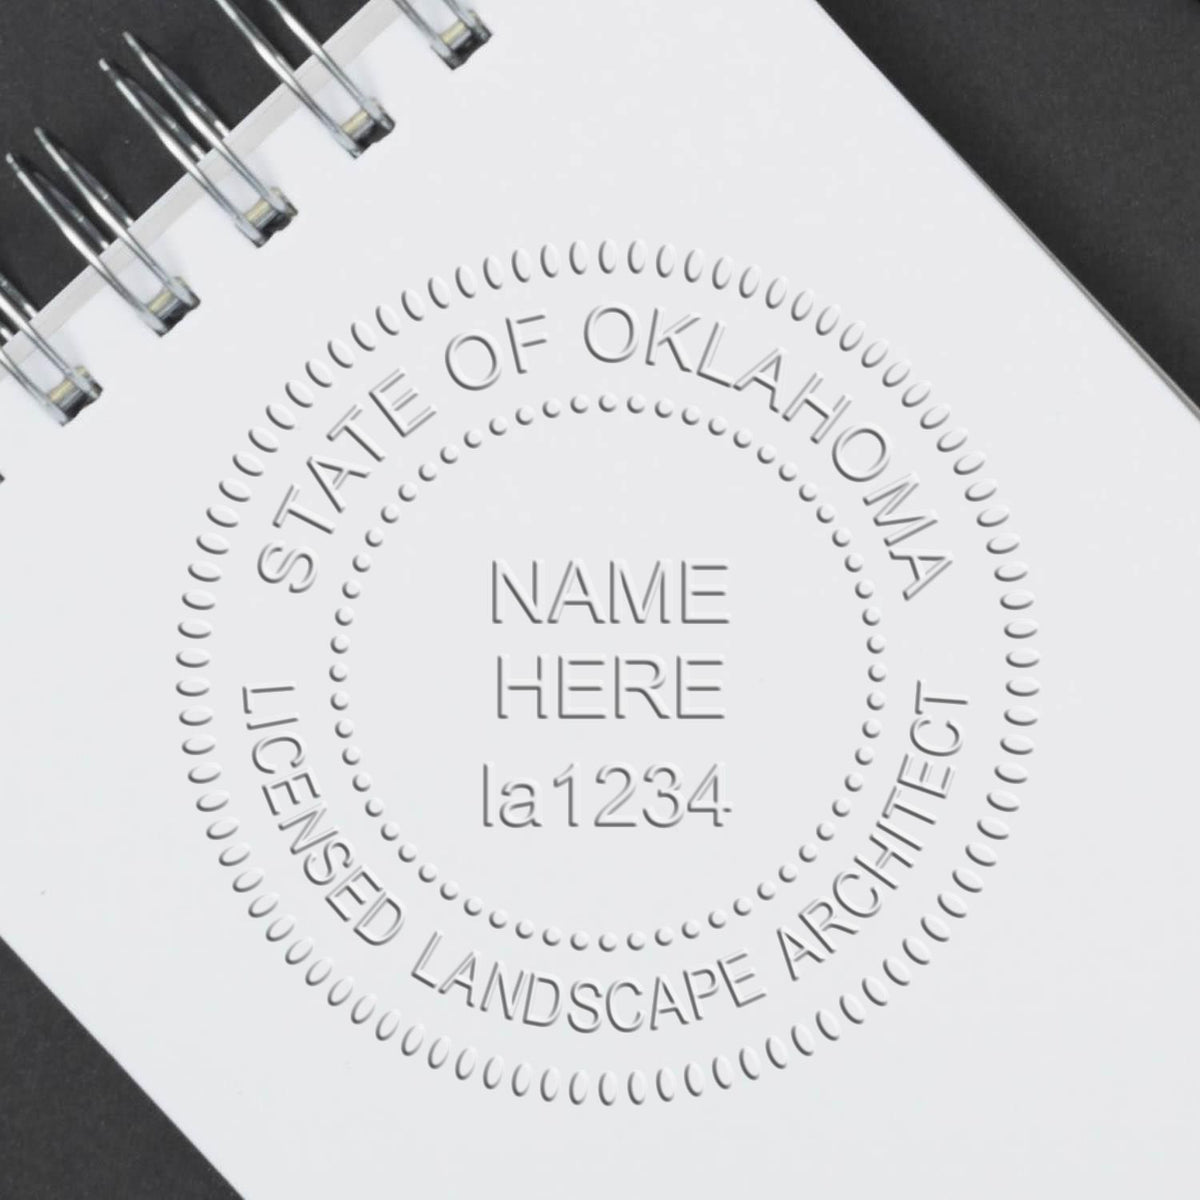 A photograph of the Hybrid Oklahoma Landscape Architect Seal stamp impression reveals a vivid, professional image of the on paper.